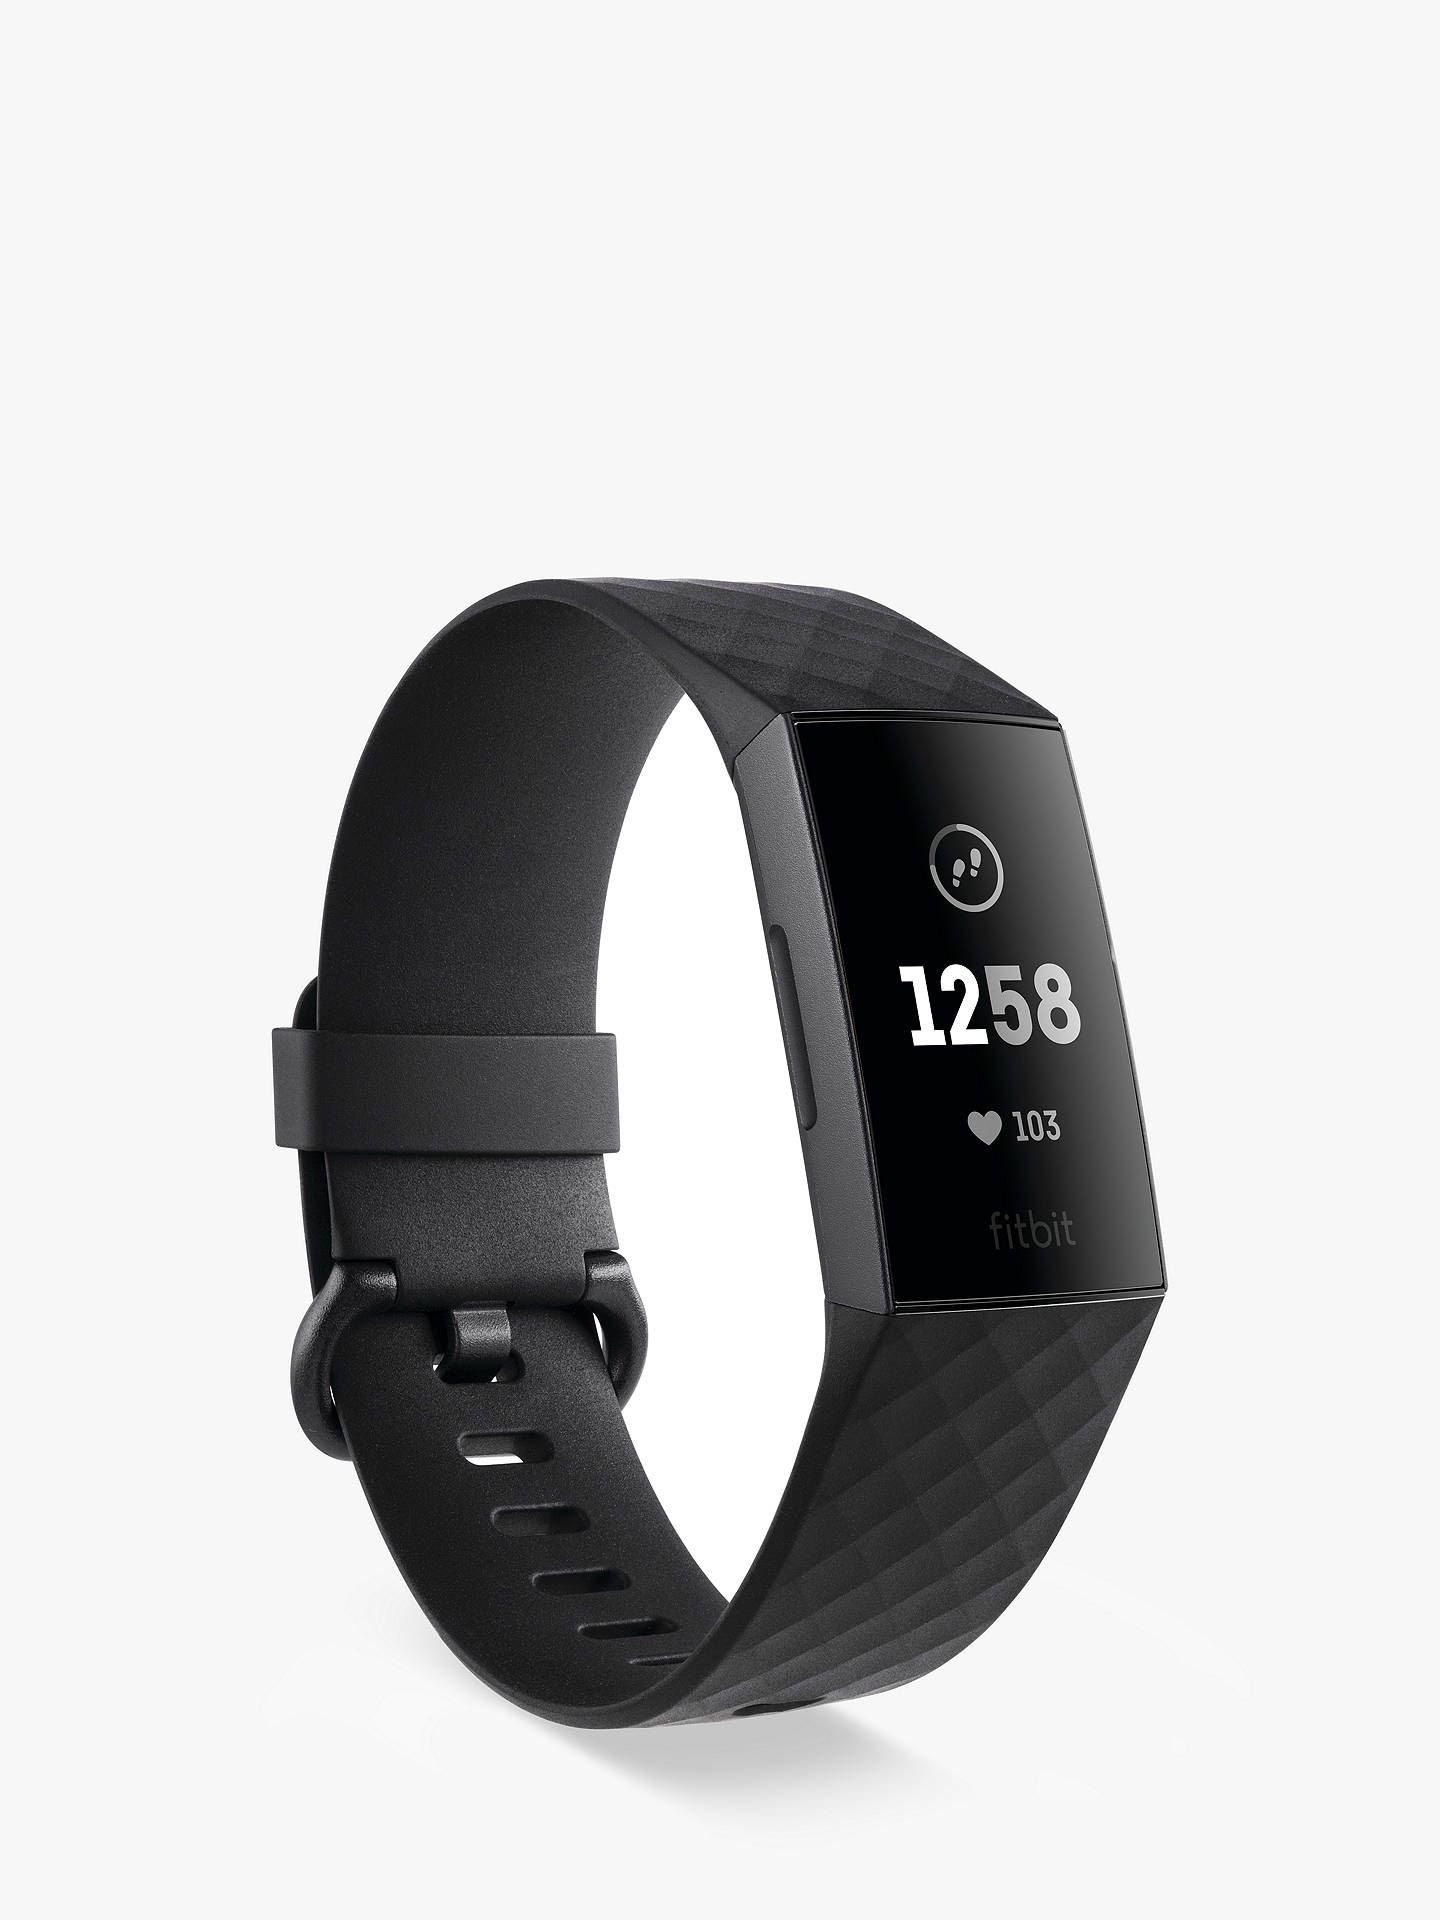 does the fitbit flex track heart rate